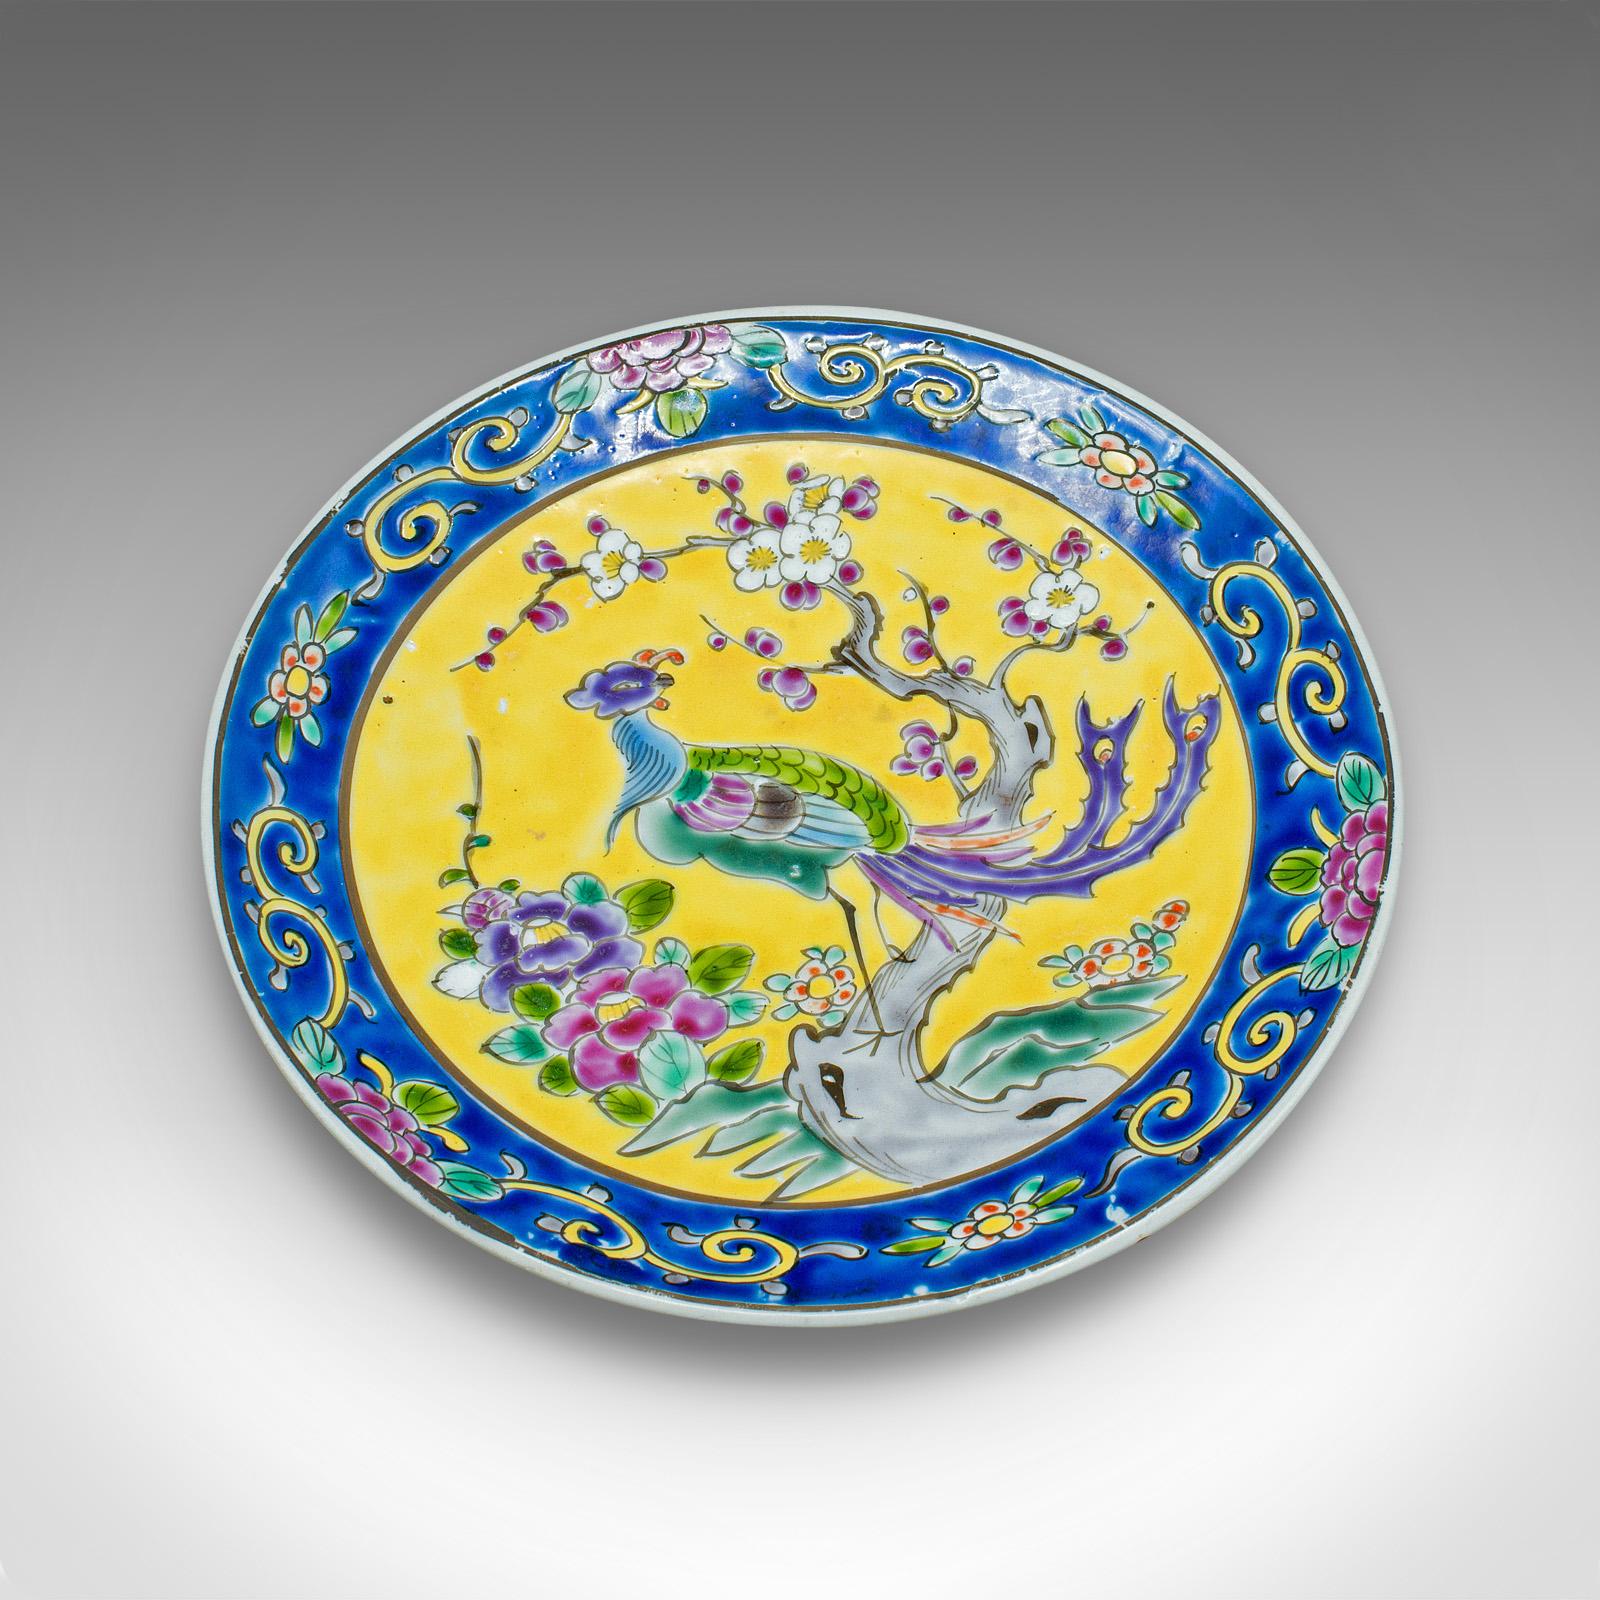 This is an antique decorative plate. A Chinese, ceramic display plate with Famille Jaune taste, dating to the late Victorian period, circa 1900.

Striking yellow and cobalt blue display plate
Displaying a desirable aged patina and in good